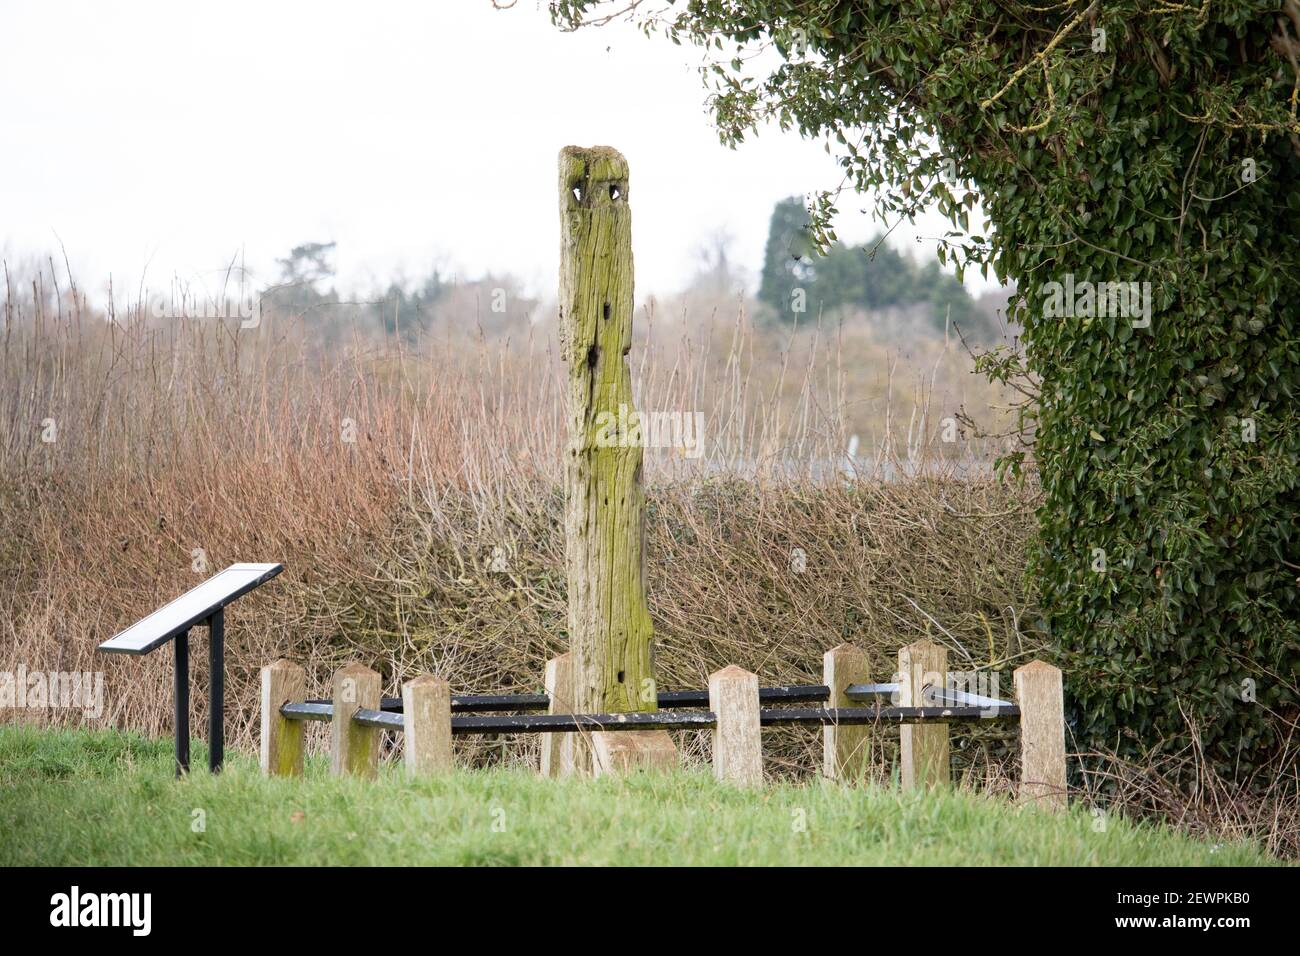 The oak Gibbert post in Bilstone, Leicestershire, that the hanged body of John Massey was chained to after his execution. Stock Photo